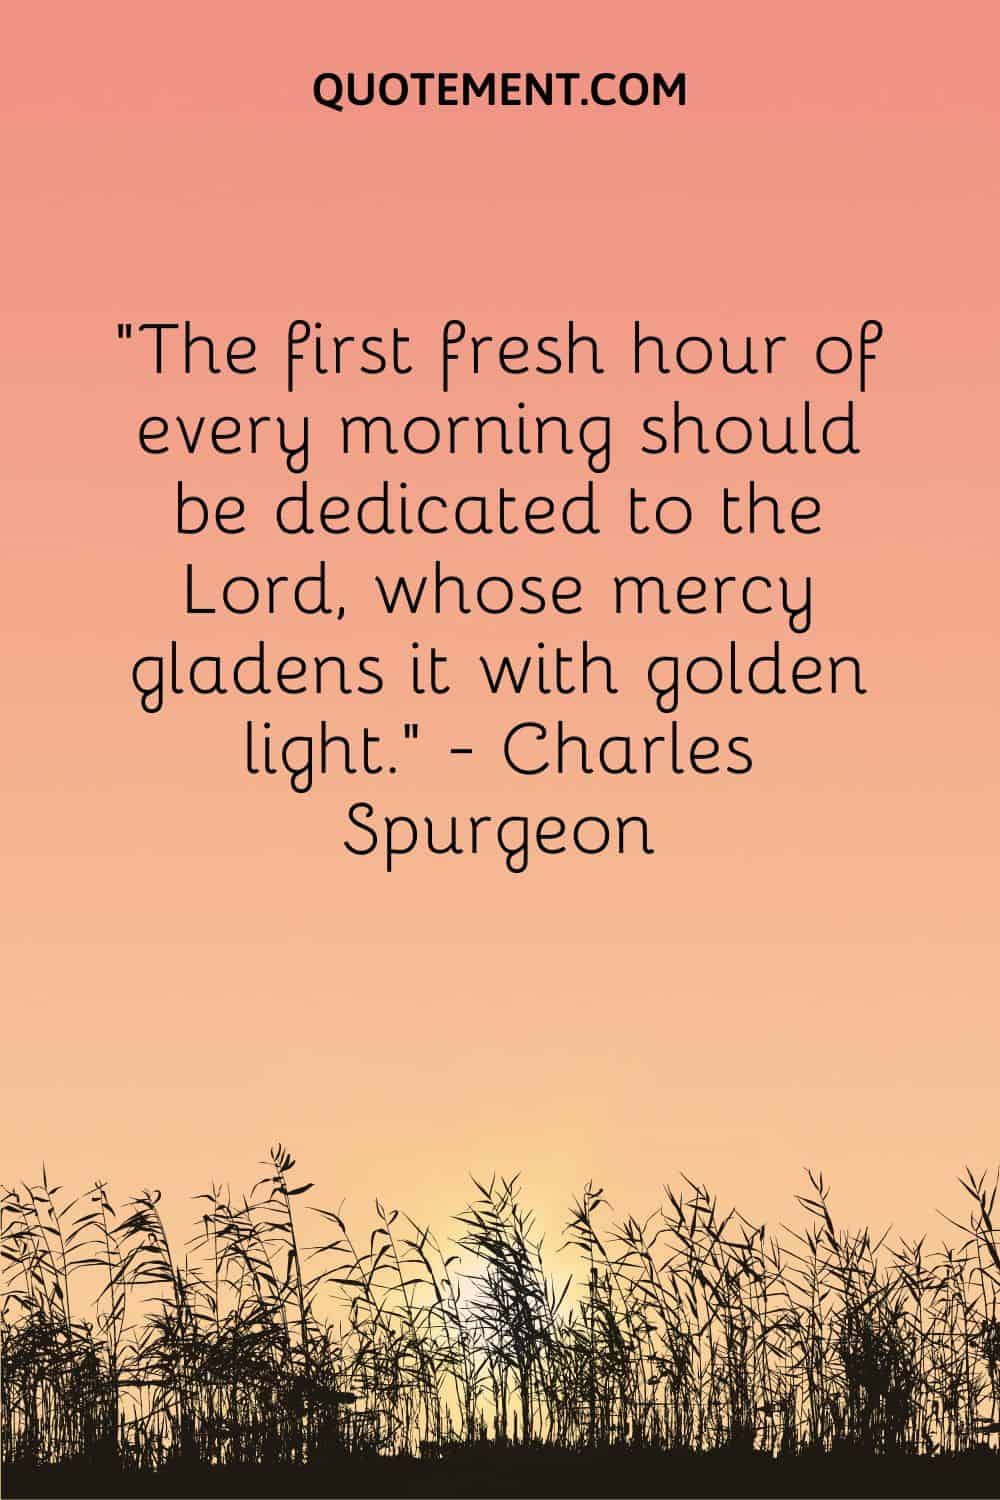 The first fresh hour of every morning should be dedicated to the Lord, whose mercy gladens it with golden light